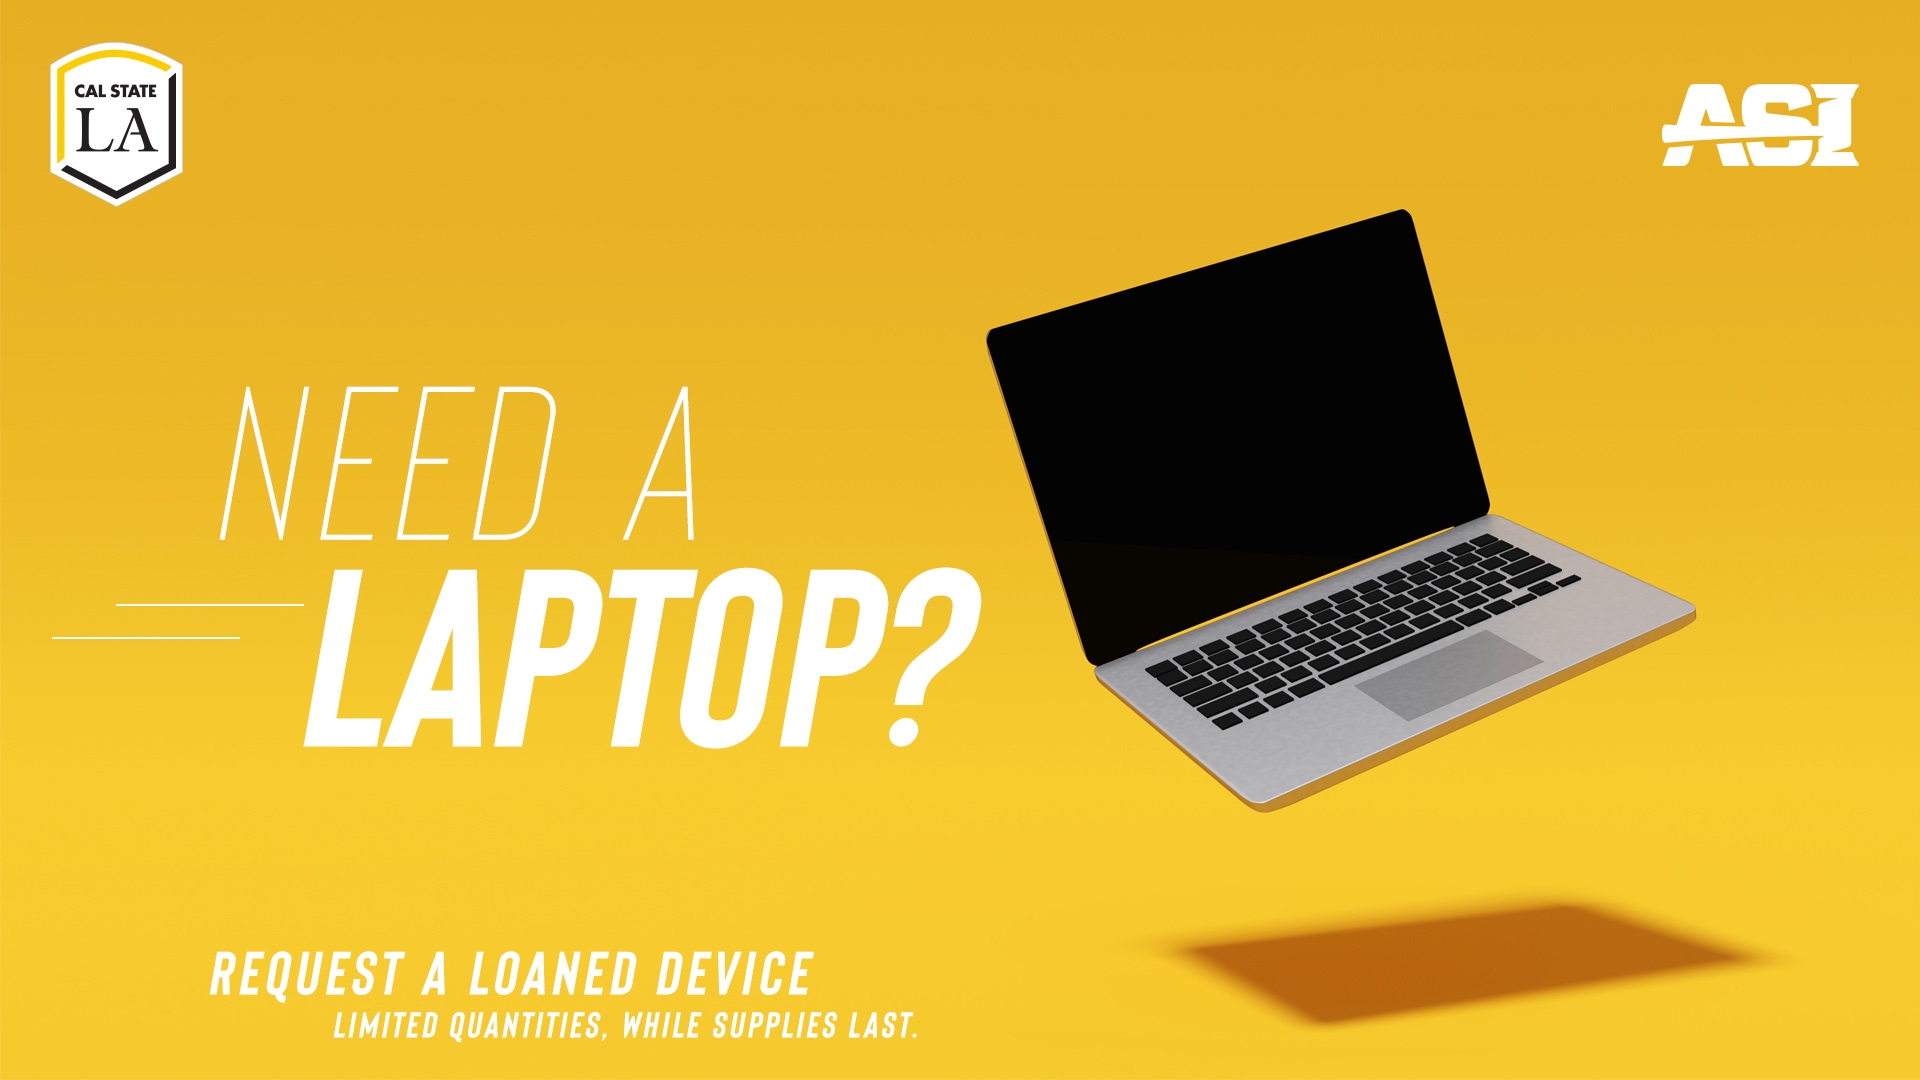 Need a laptop?